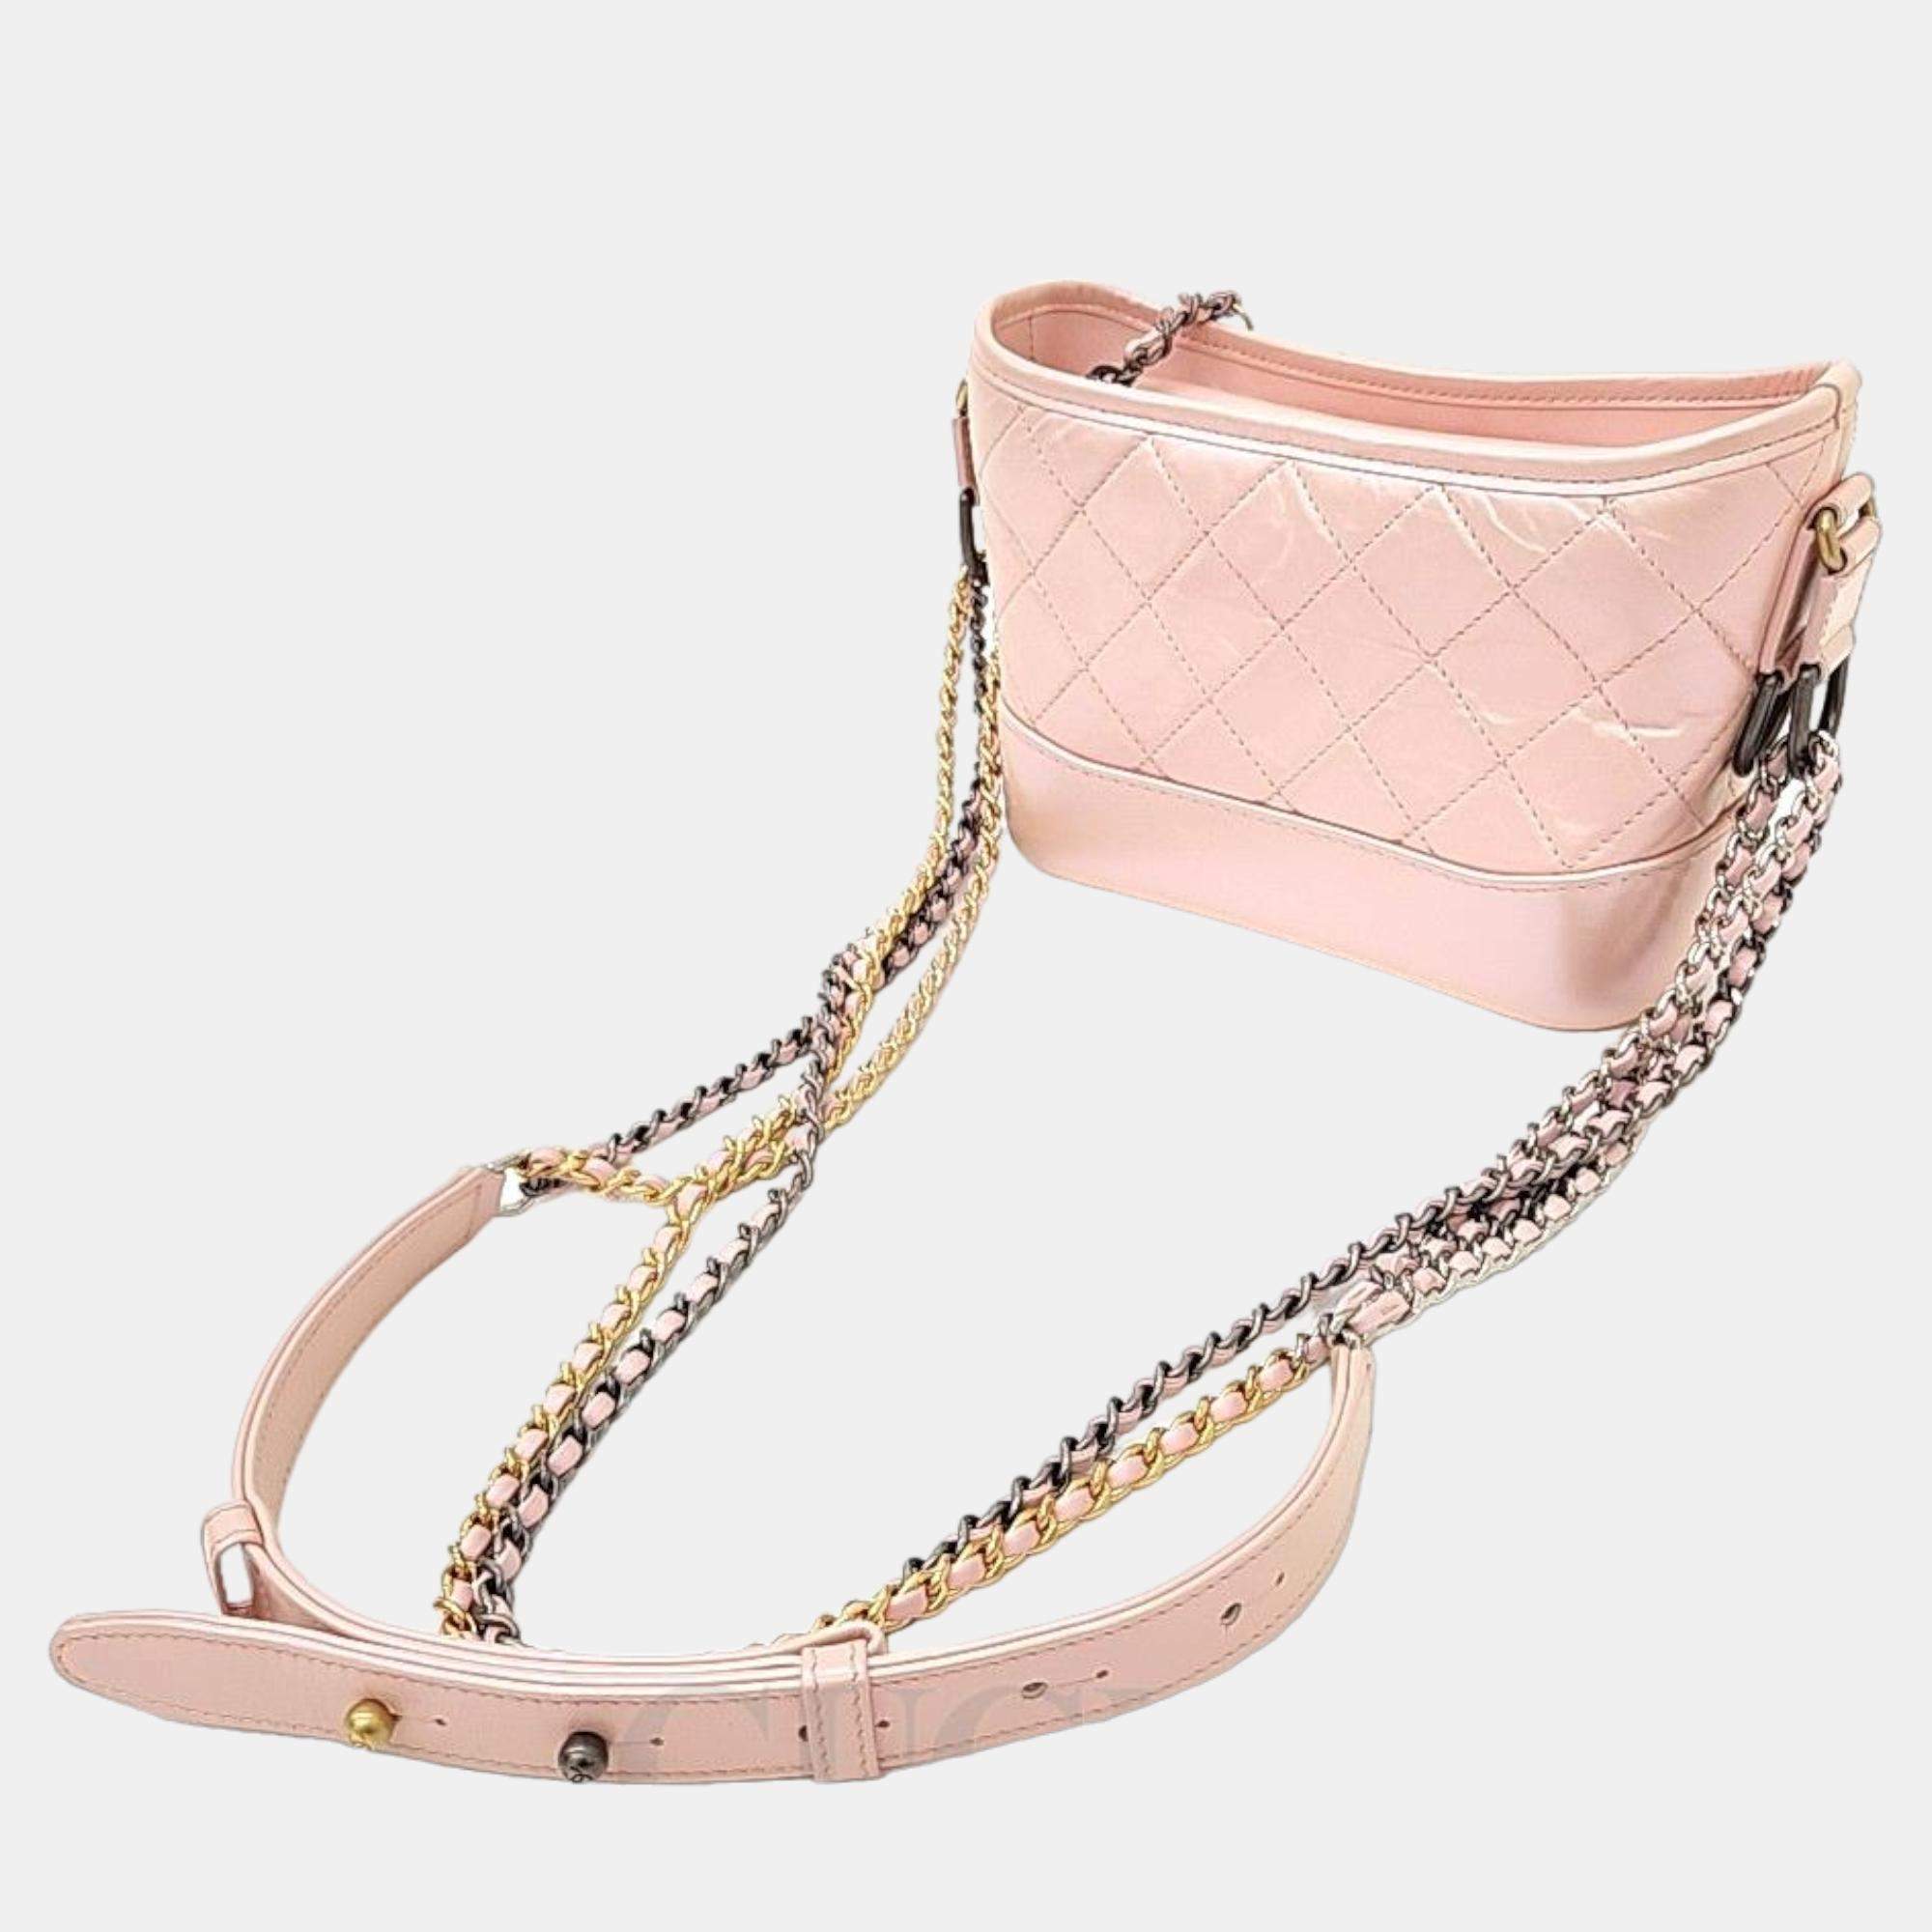 Chanel Pink Leather Gabrielle Small Hobo Bag Chanel | The Luxury Closet